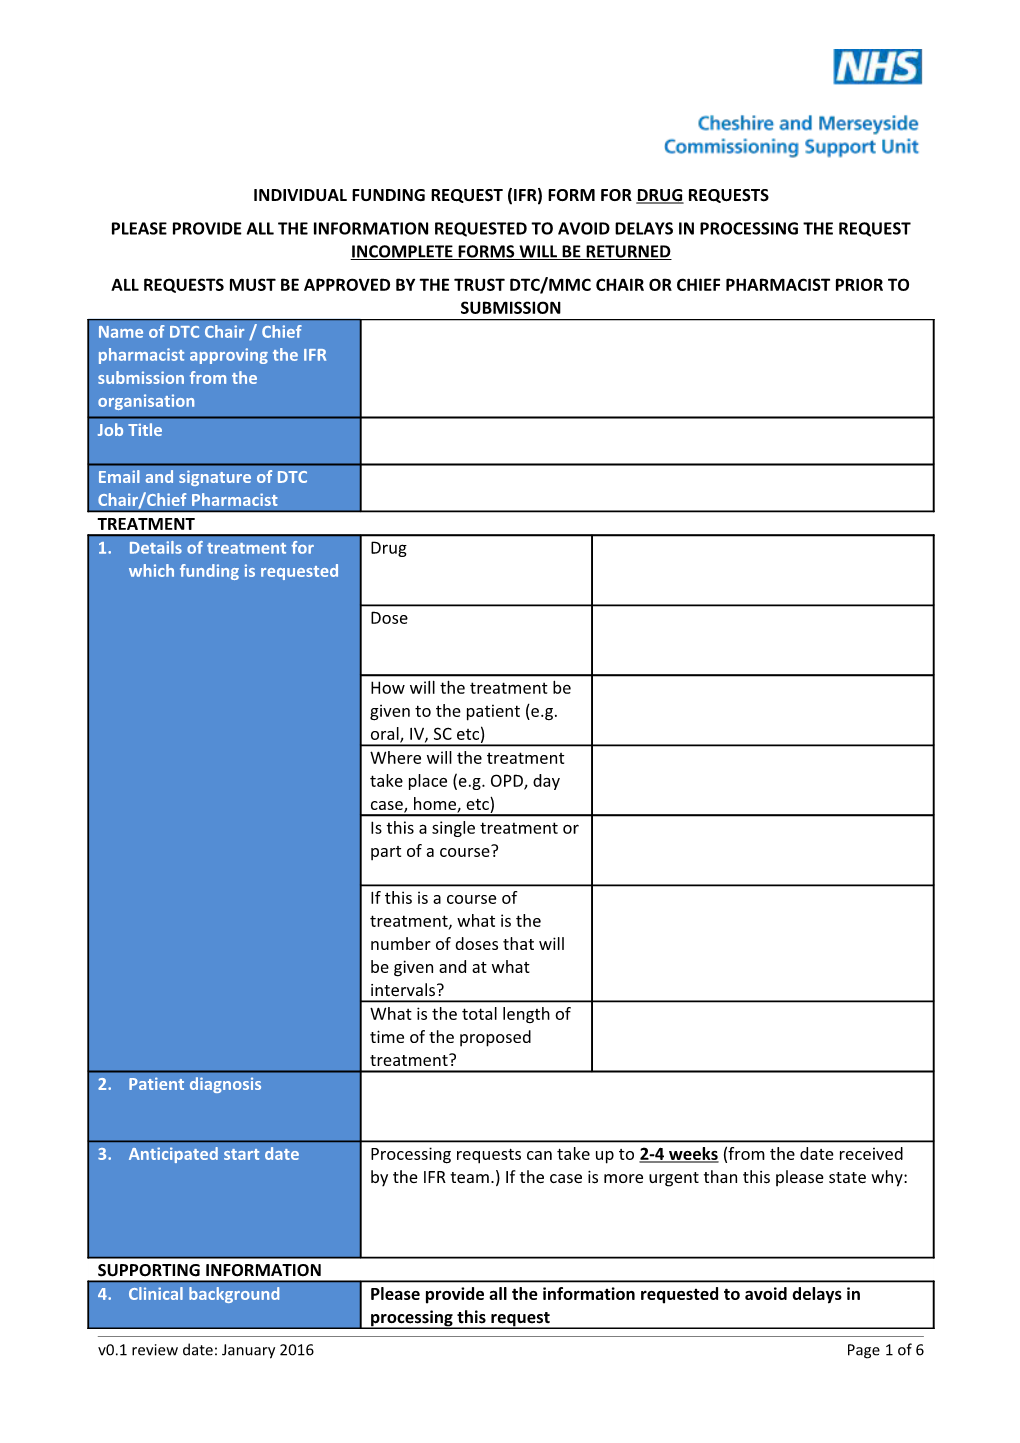 Individual Funding Request (Ifr) Form for Drug Requests